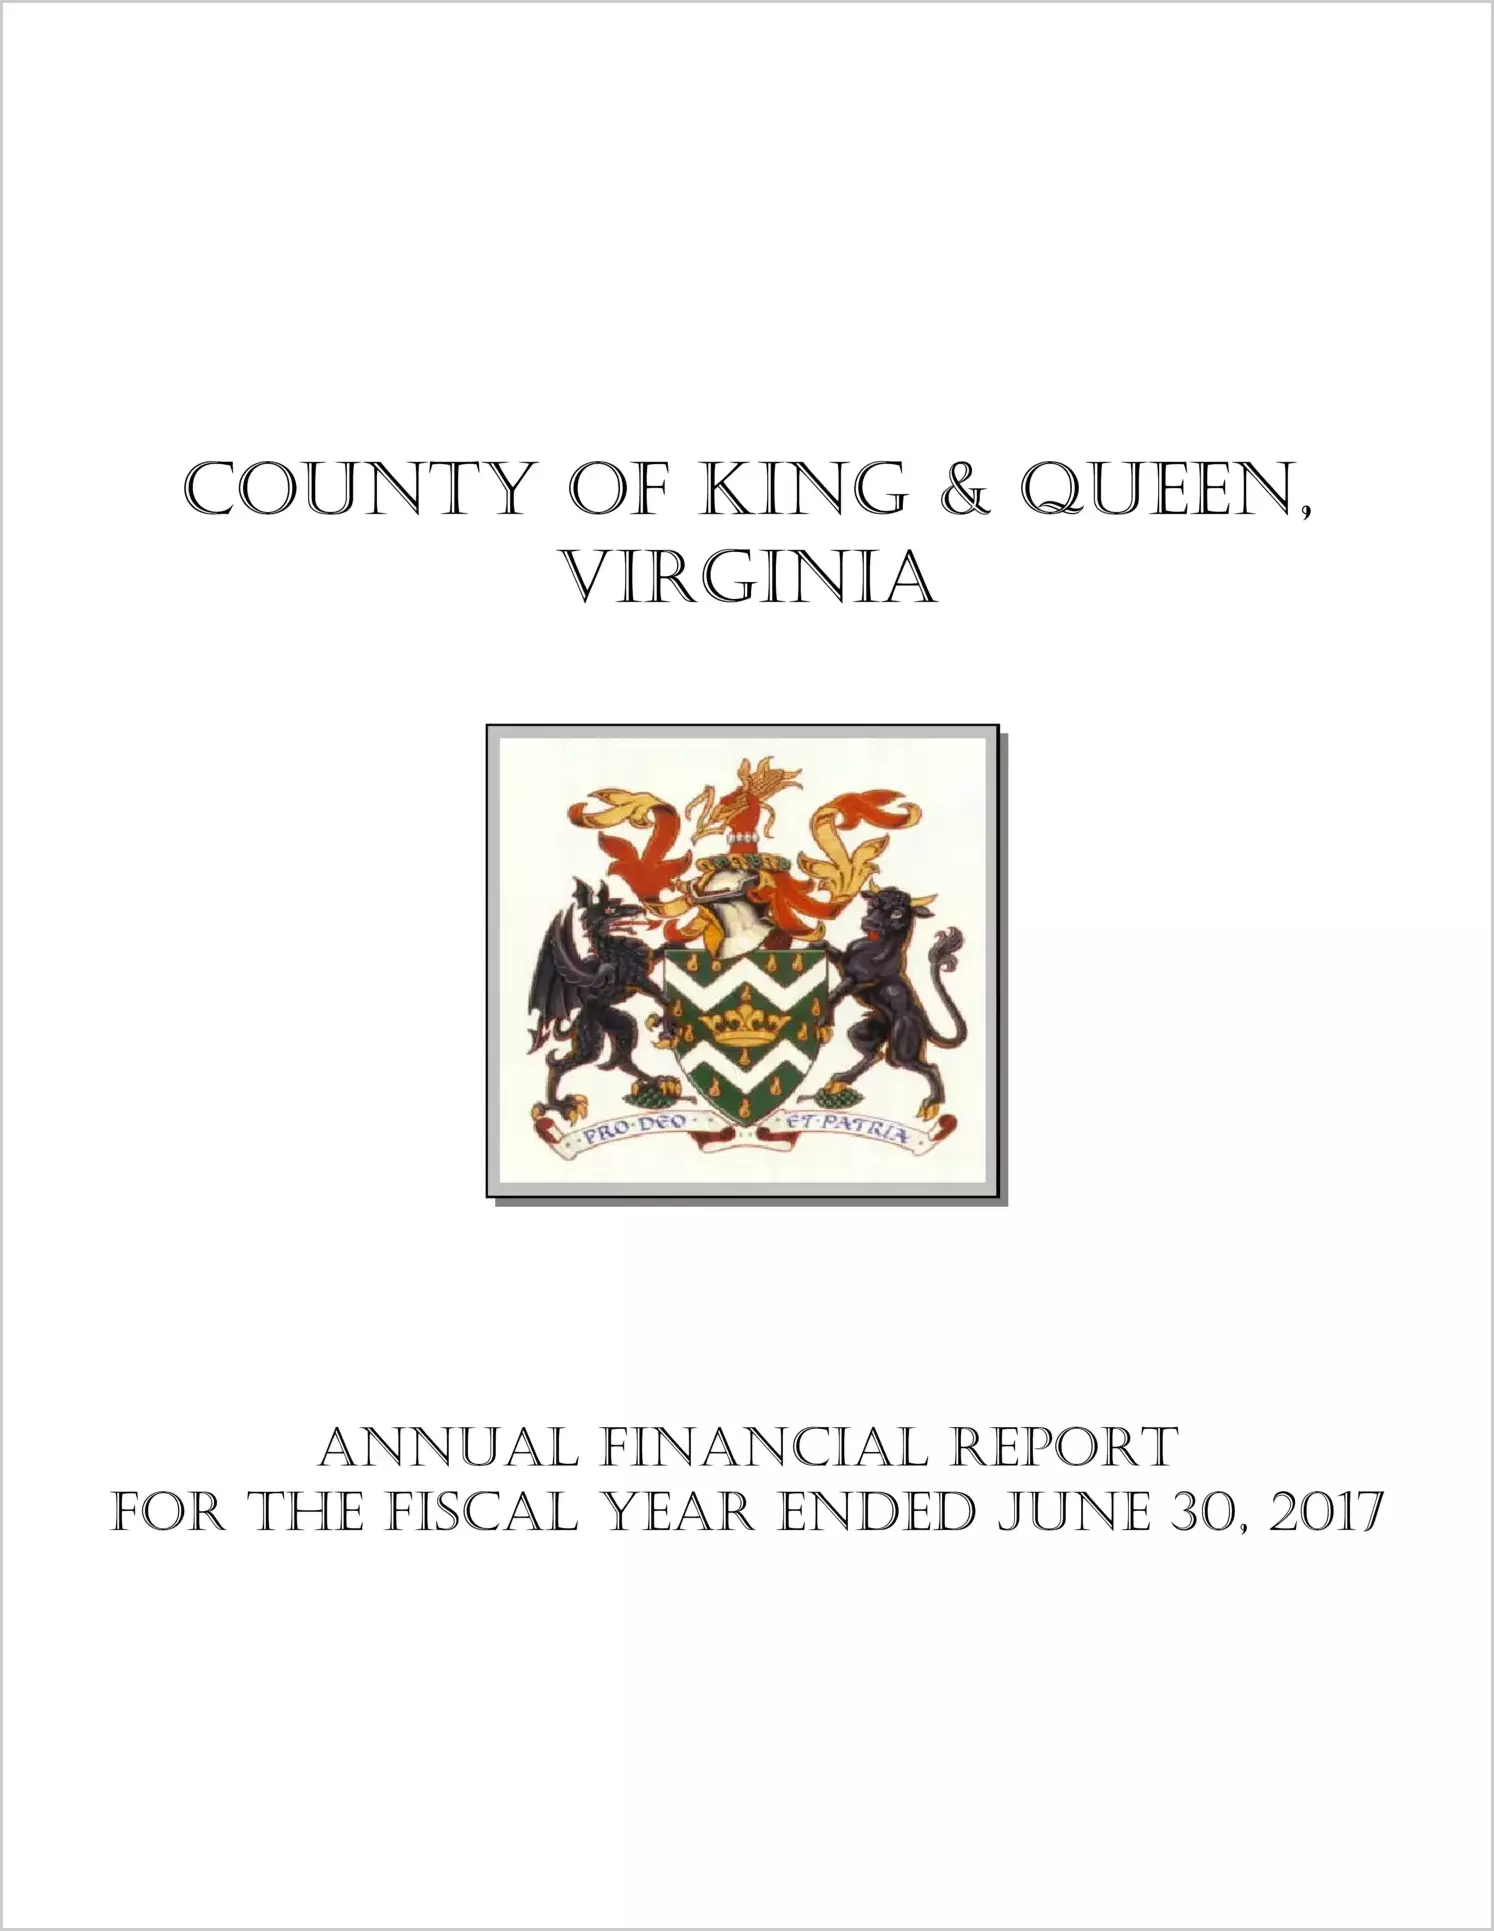 2017 Annual Financial Report for County of King and Queen